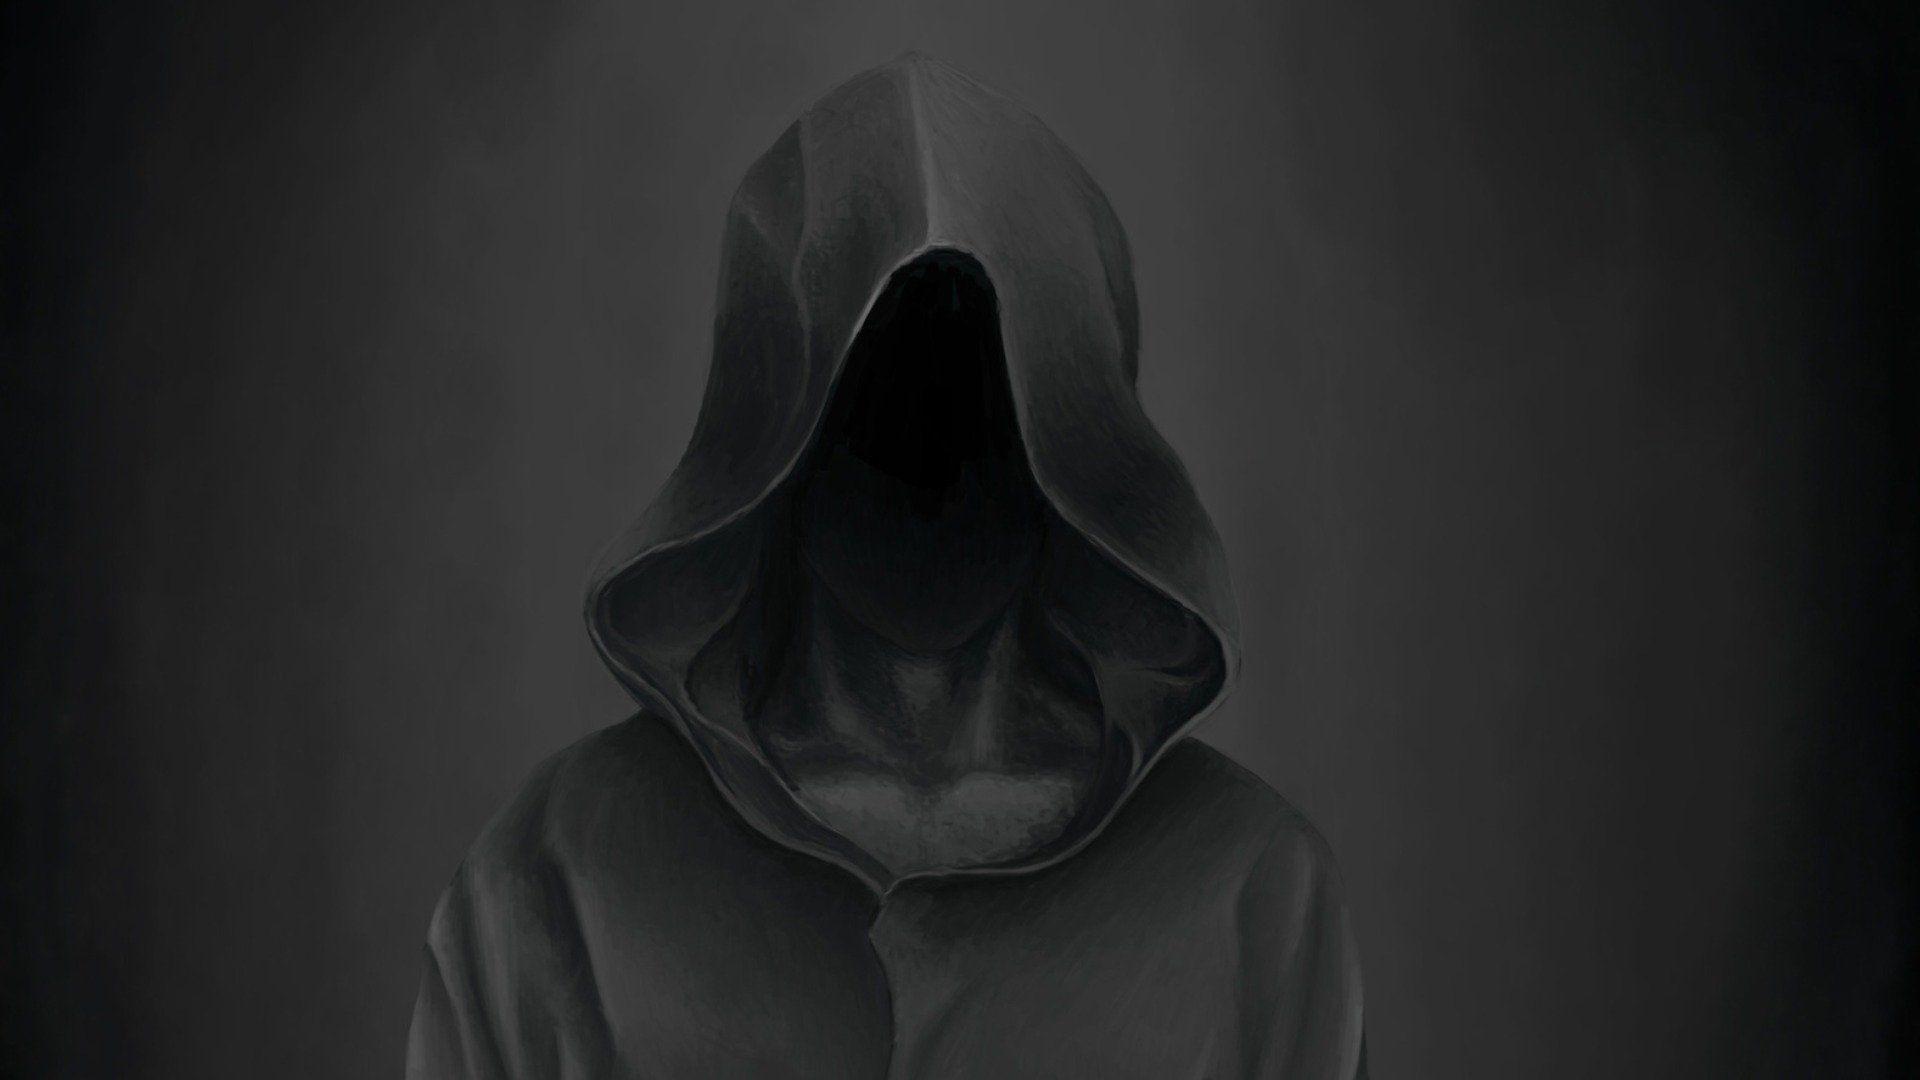 iPhone wallpaper anonymous with black hood  Wallpapers Download 2023